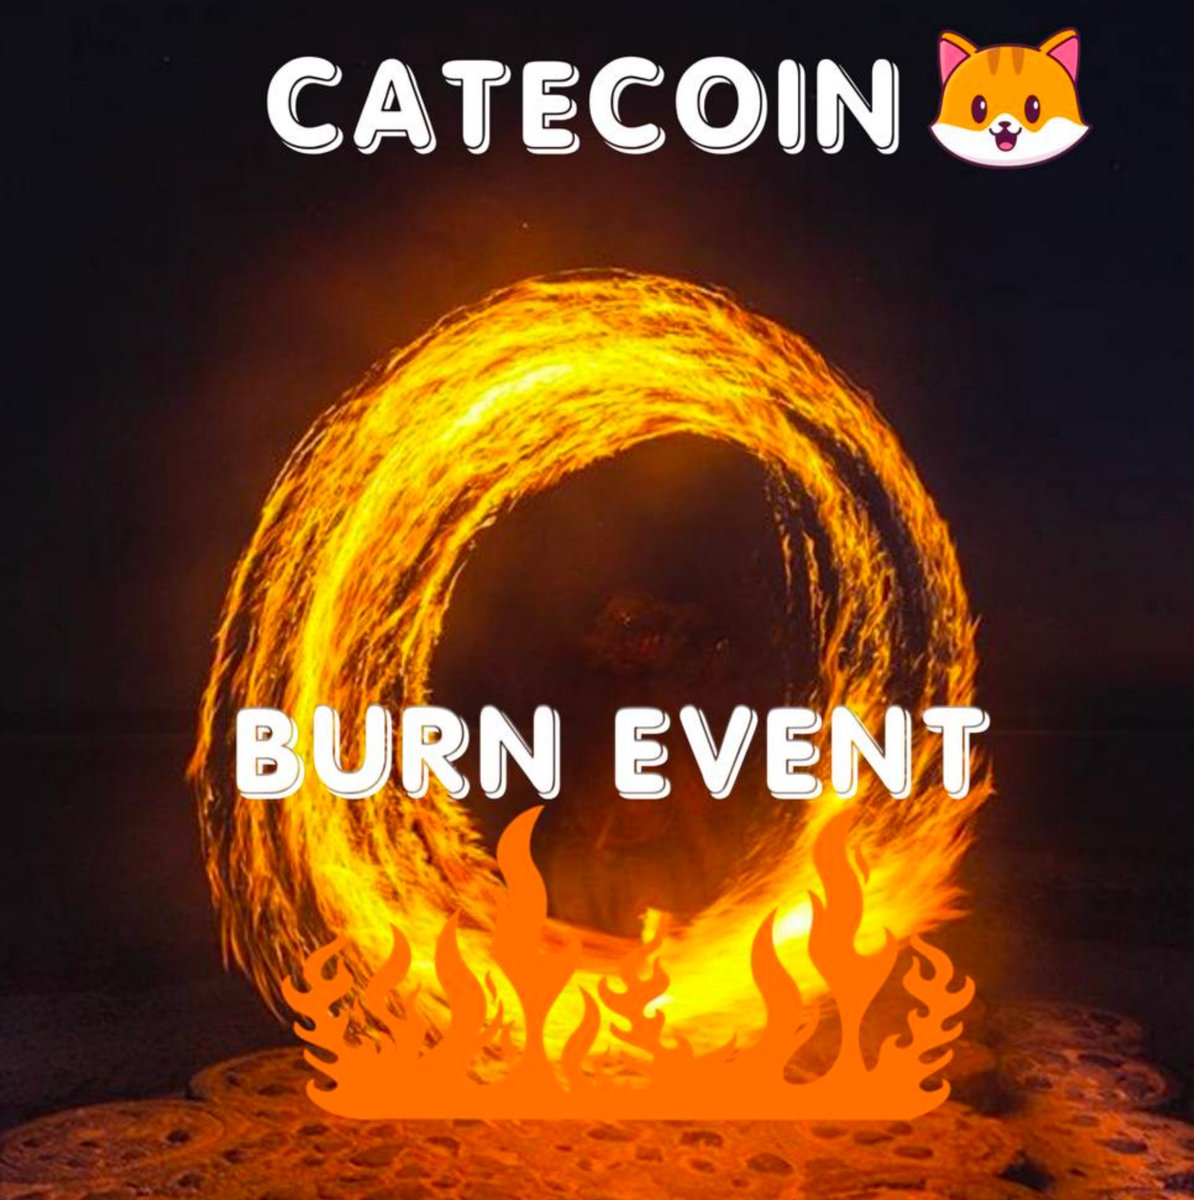 For the next burn event the control lever is in your hands.

The #wallet address must receive a transfer of 1000 #Cate token from 1000 hodlers  ( 1 Wallet - 1 Token).

#Wallet address-  
𝟬𝘅𝗔𝟯𝗰𝟮𝗕𝗕𝗕𝗰𝟱𝟬𝗯𝟱𝟳𝟰𝟰𝟳𝟳𝟴𝟬𝟲𝗘𝗳𝟬𝗔𝗳𝗗𝗰𝟴𝗯𝟰𝟮𝗳𝟲𝟰𝗳𝗲𝗲𝟲𝟯𝗮

The…